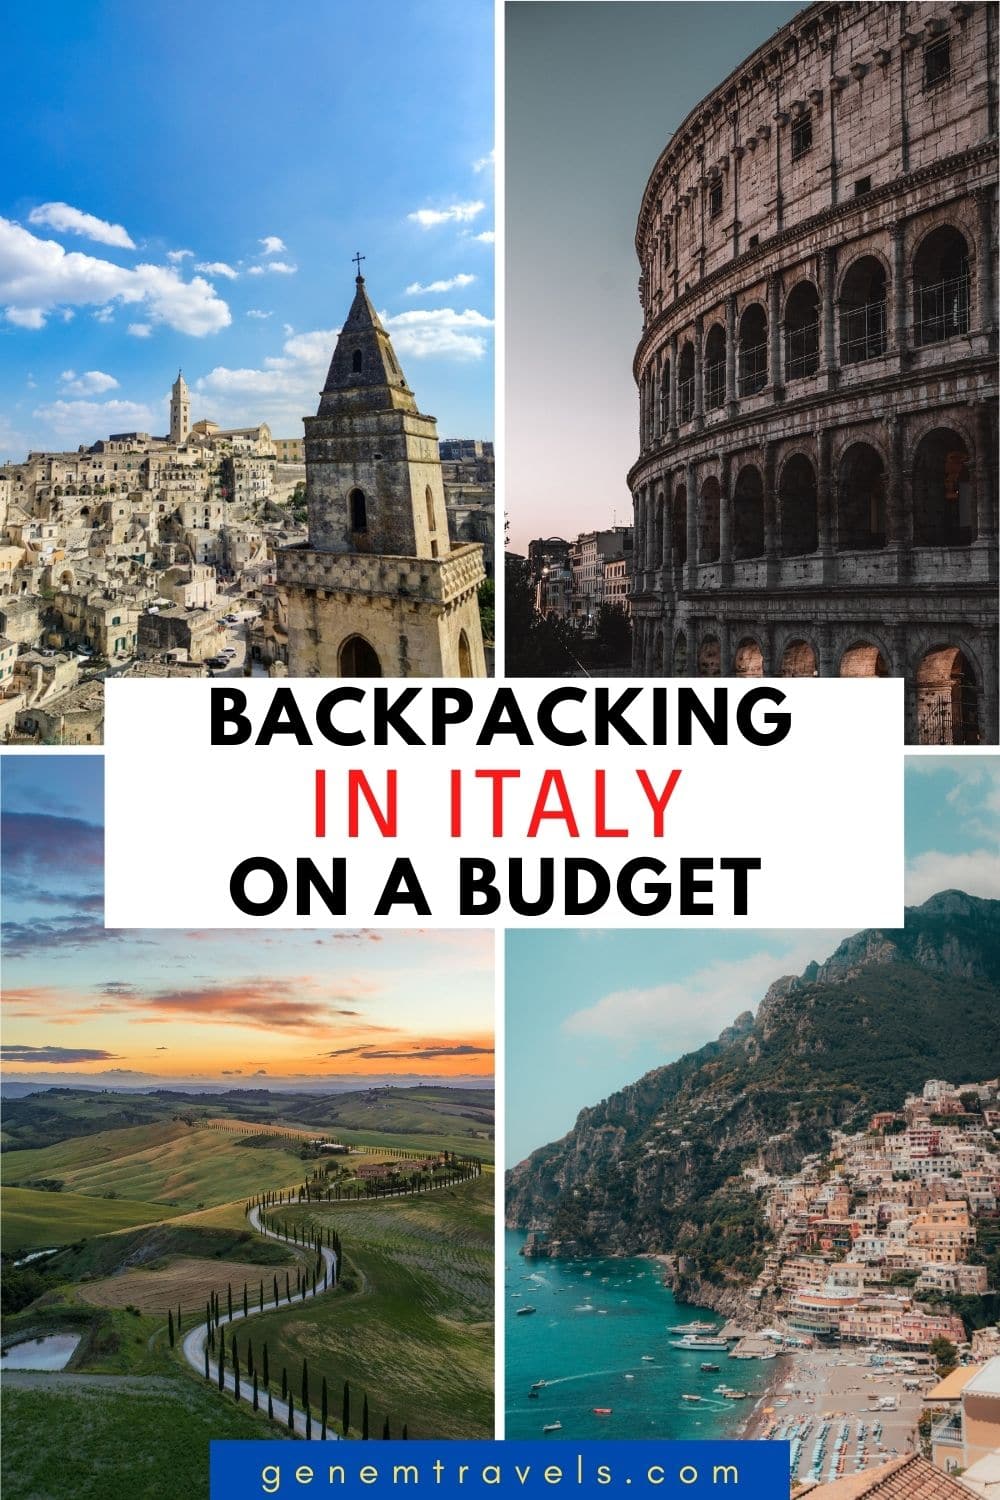 Backpacking Italy on a Budget with 18 euros Per Day - BuDget Backpacking In Italy